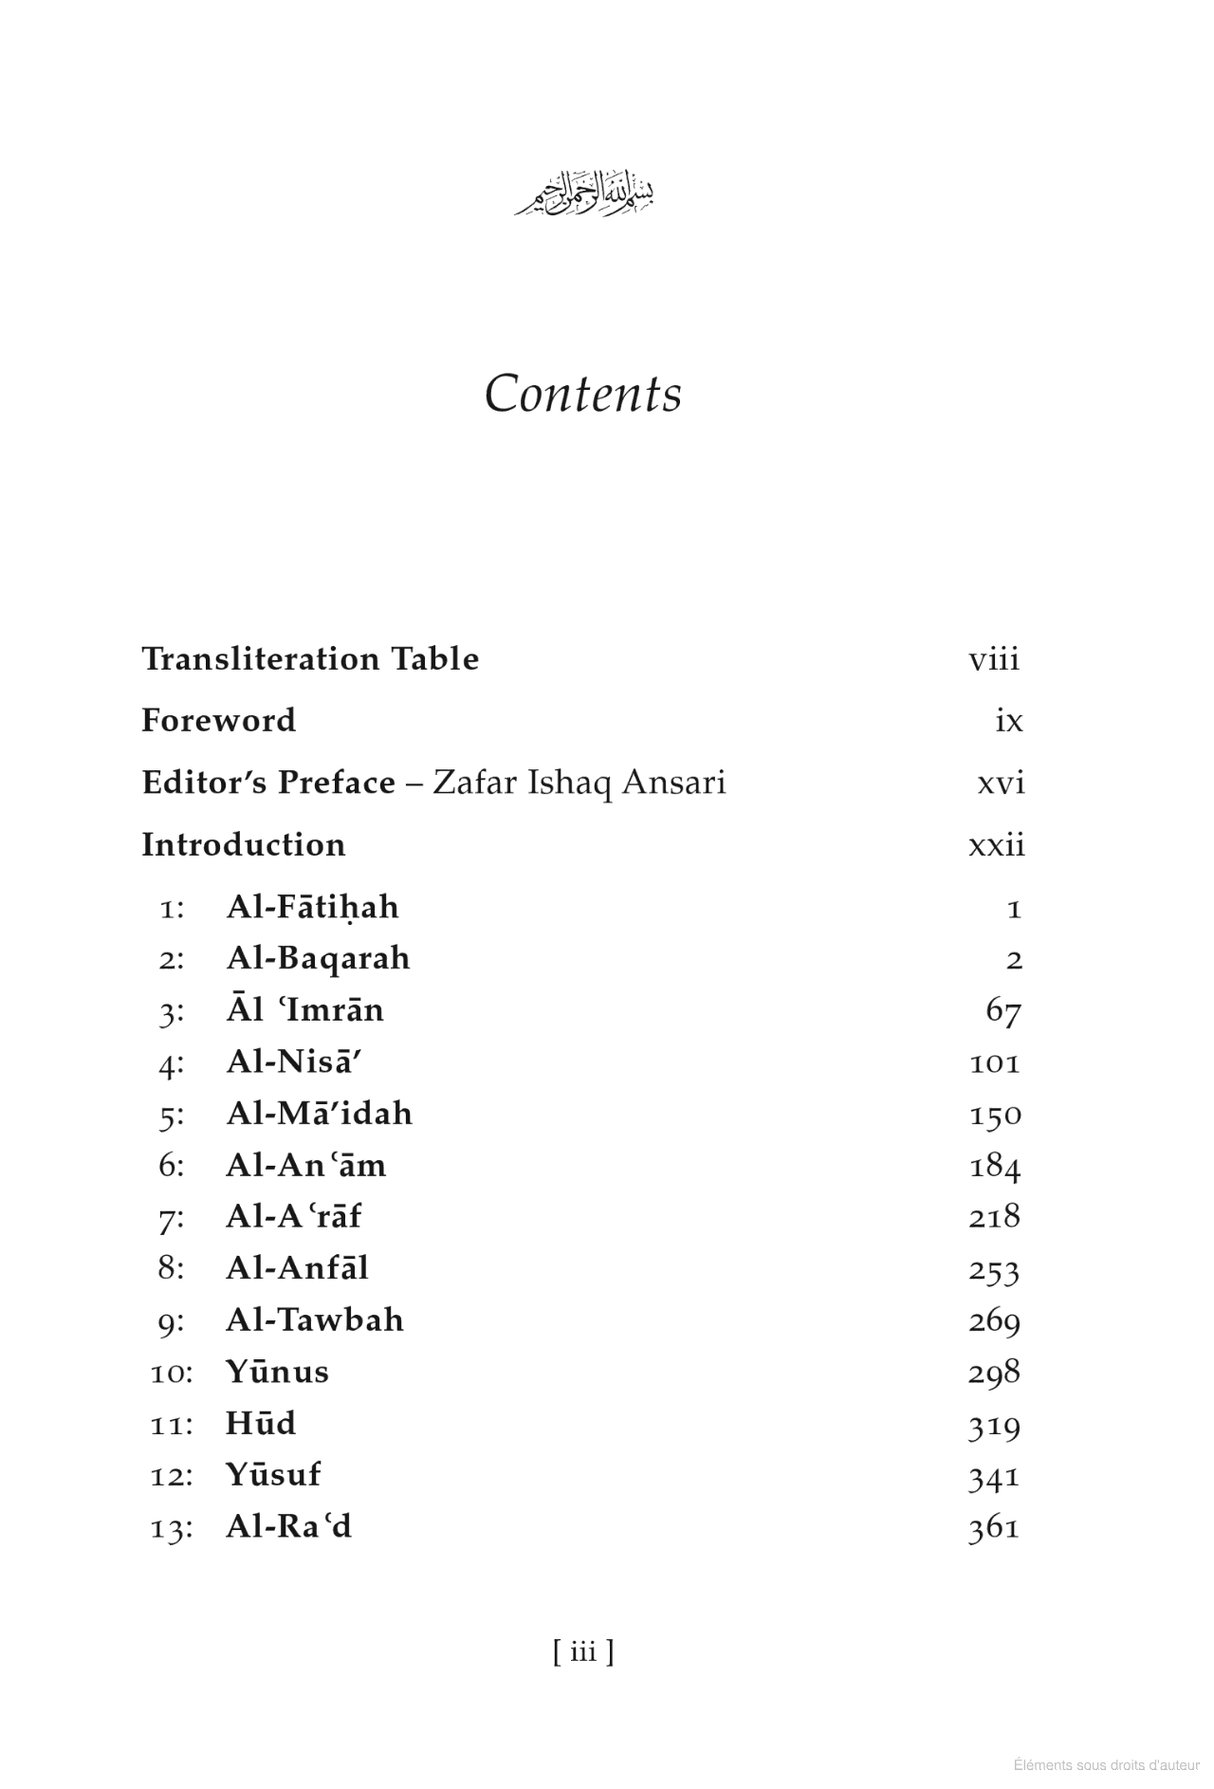 Towards Understanding the Qur'an ENGLISH ONLY EDITION